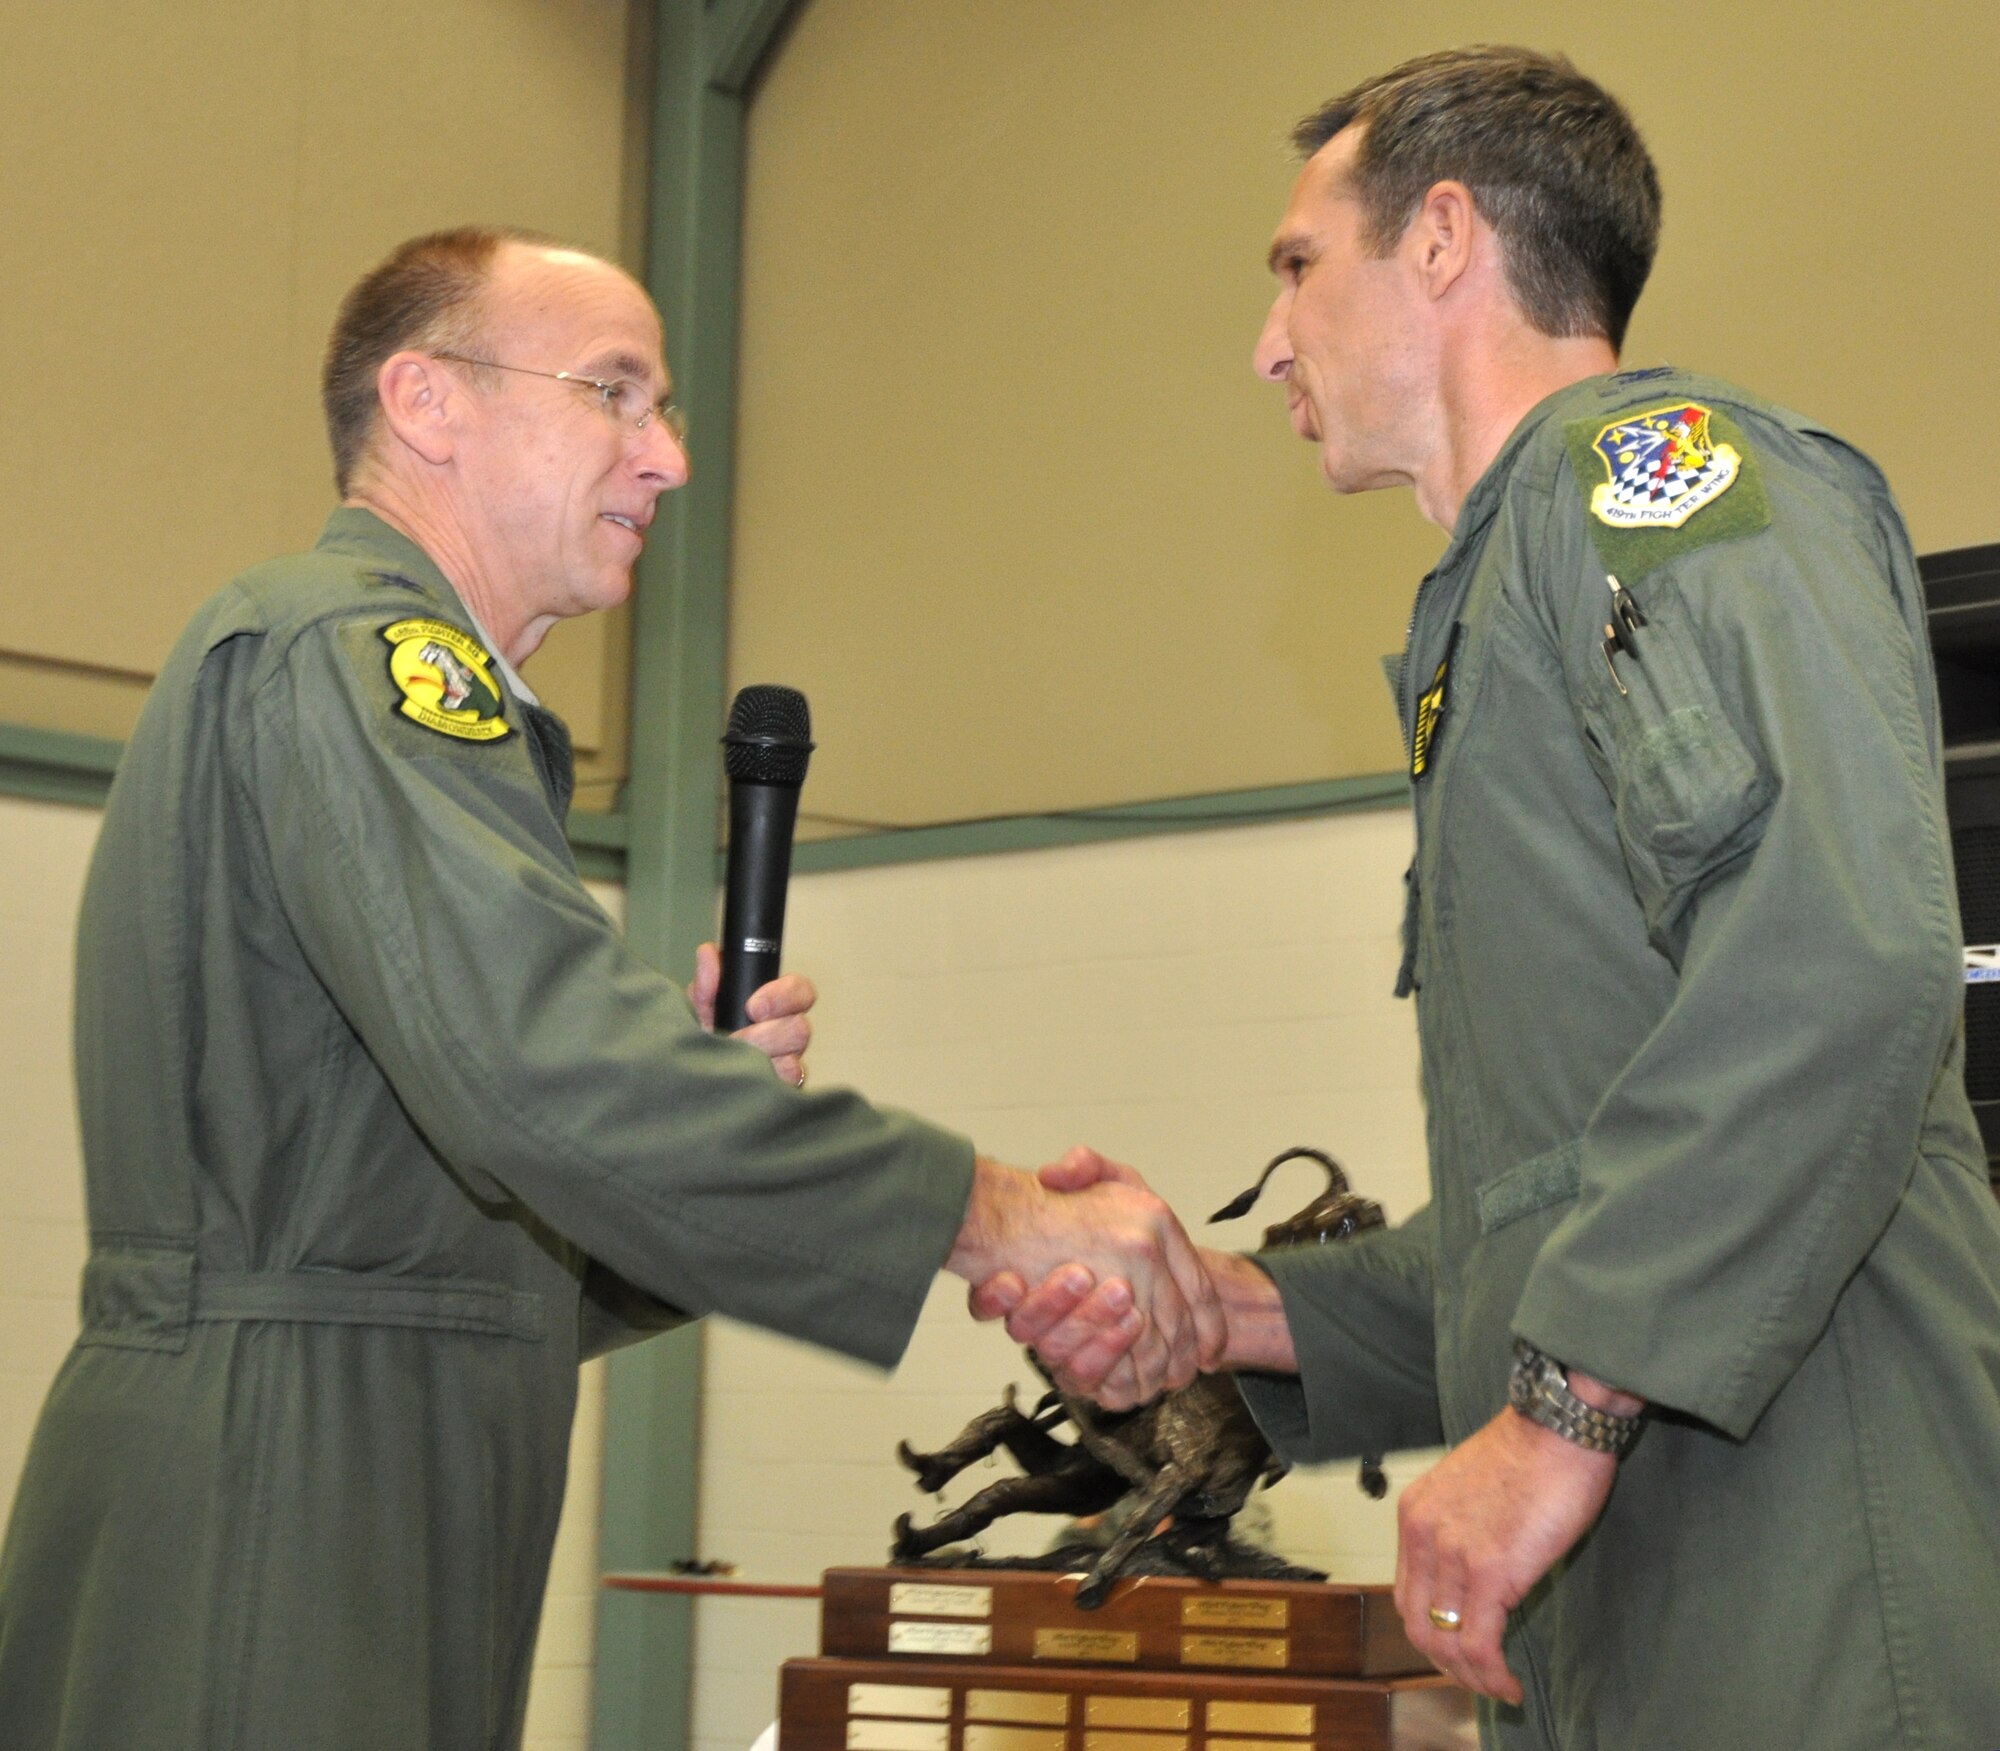 Col. Donald Lindberg, 10th Air Force vice commander, congratulates this year's winner of the 10th Air Force Power and Vigilance trophy, Col. Bryan Radliff, 419th Fighter Wing commander. This is only the fifth year this trophy has found a home. The first four winners being the 477th Fighter Group, Elmendorf, Alaska, 482nd Fighter Wing, Homestead ARB, Fla., 301st Fighter Wing, NAS Fort Worth JRB, Texas, and the 442nd Fighter Wing, Whiteman AFB, Missouri. The Power and Vigilance Award is presented annually to the 10 AF Reserve unit that exhibits the NAF mission as "the premier provider of affordable, integrated, flexible, and mission-ready Citizen Airmen to execute power and vigilance missions in support of U.S. National Security.” The symbolism of the bronze figure on the award says it all, ‘grabbing the bull by the horns’. (U.S. Air Force photo/Master Sgt. Julie Briden-Garcia) 